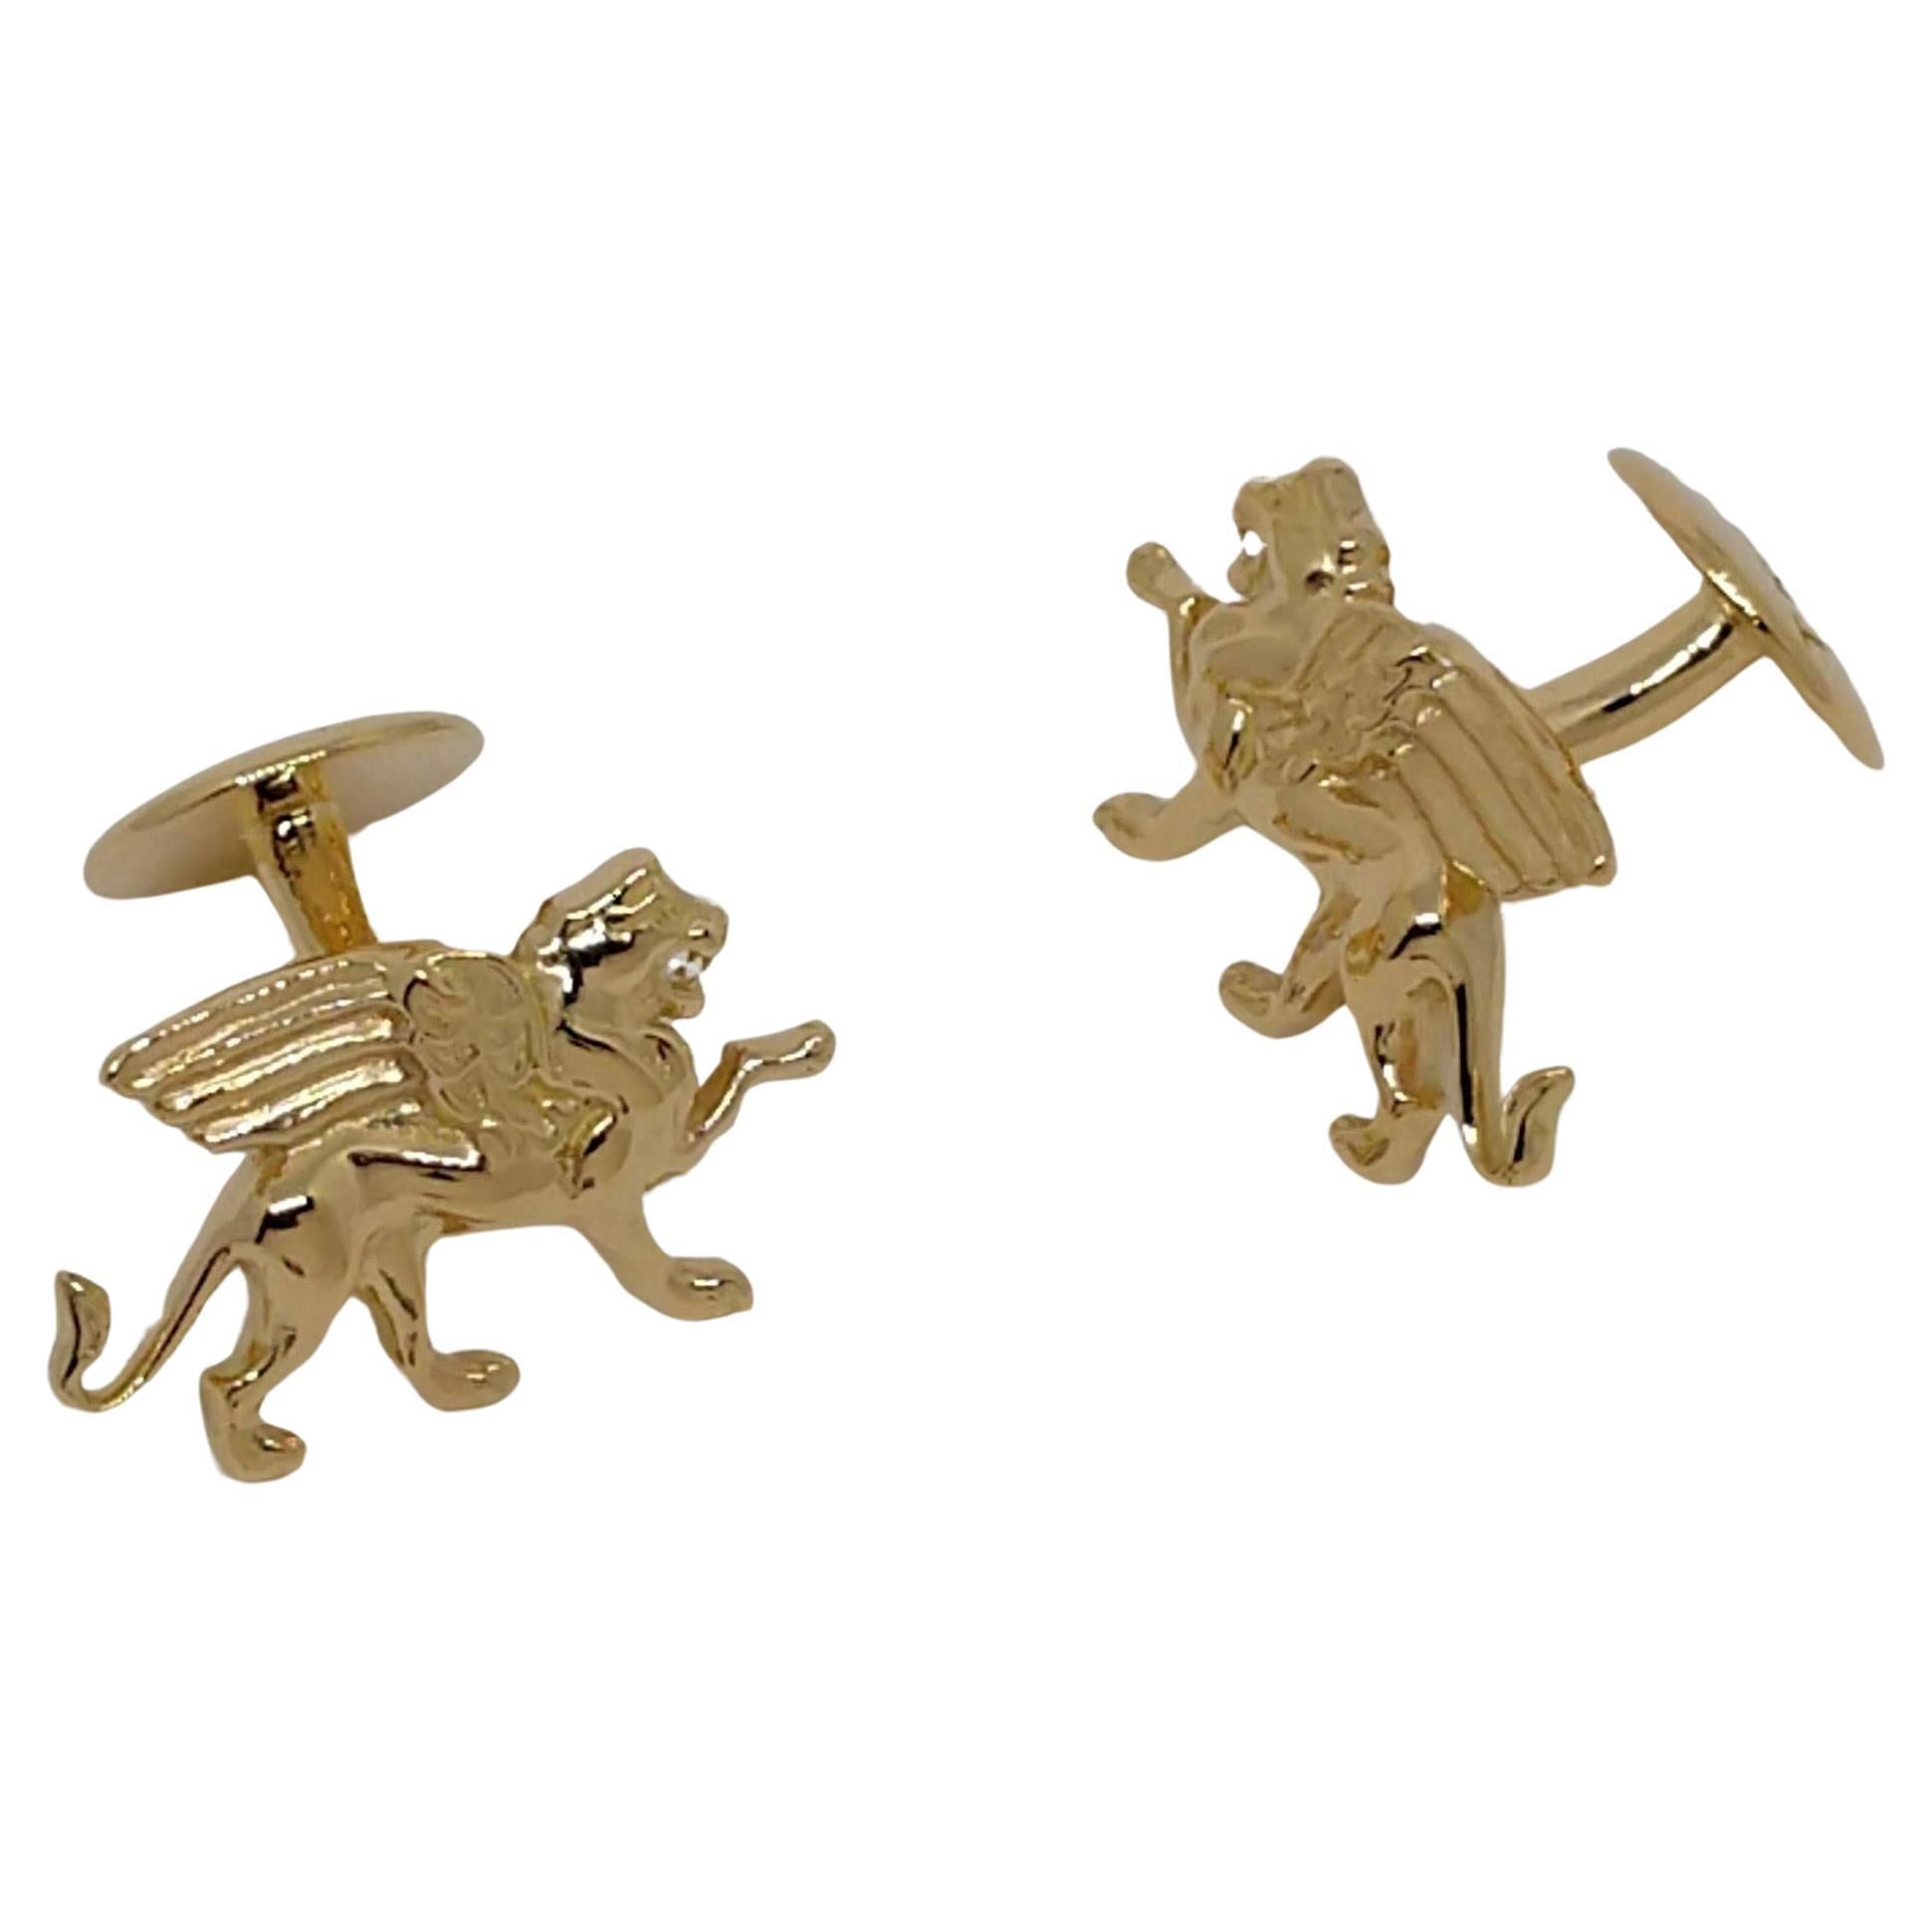 14 Karat Yellow Gold Winged Griffin Cufflinks  Tiffany designer , Thomas Kurilla created this for 1st dibs exclusively. Sculpture is my passion. This griffin is getting ready to take on his enemy 4 teeth and all. 
20 mm wide x 11.5 mm high x 3mm